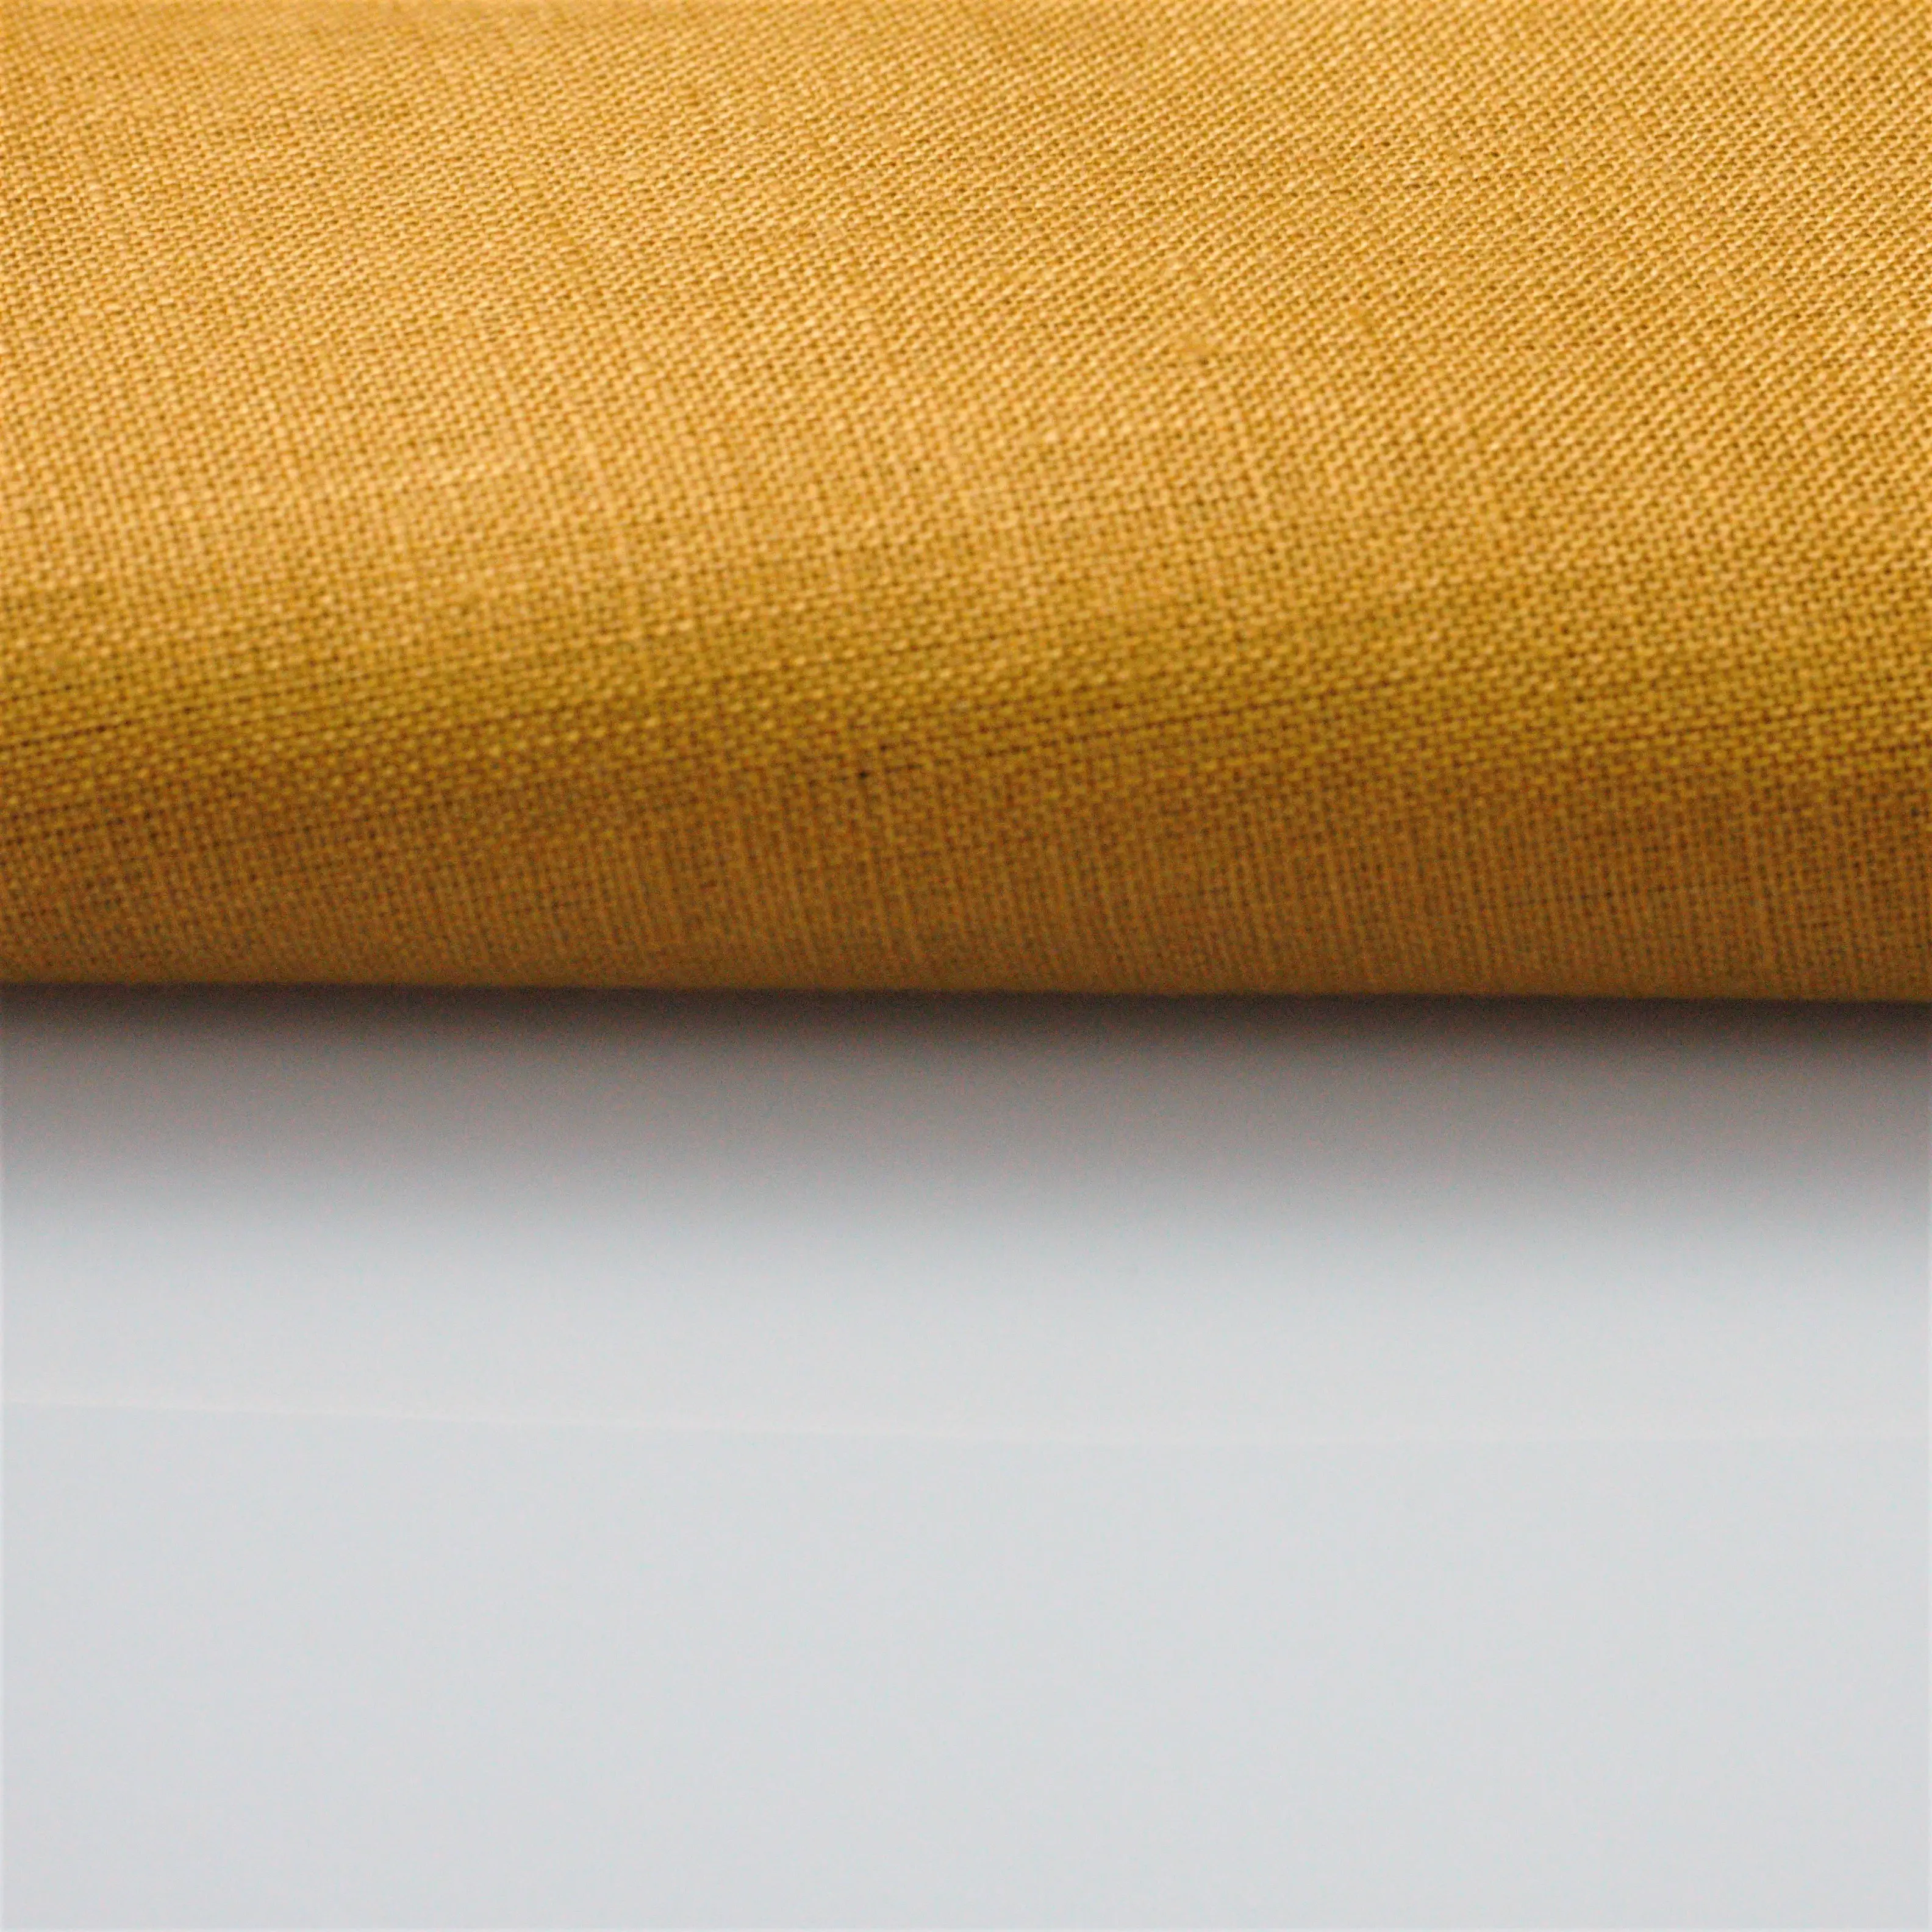 Linen Fabric High Quality Linen Curtains100% Recycled Flax Linen Fabric